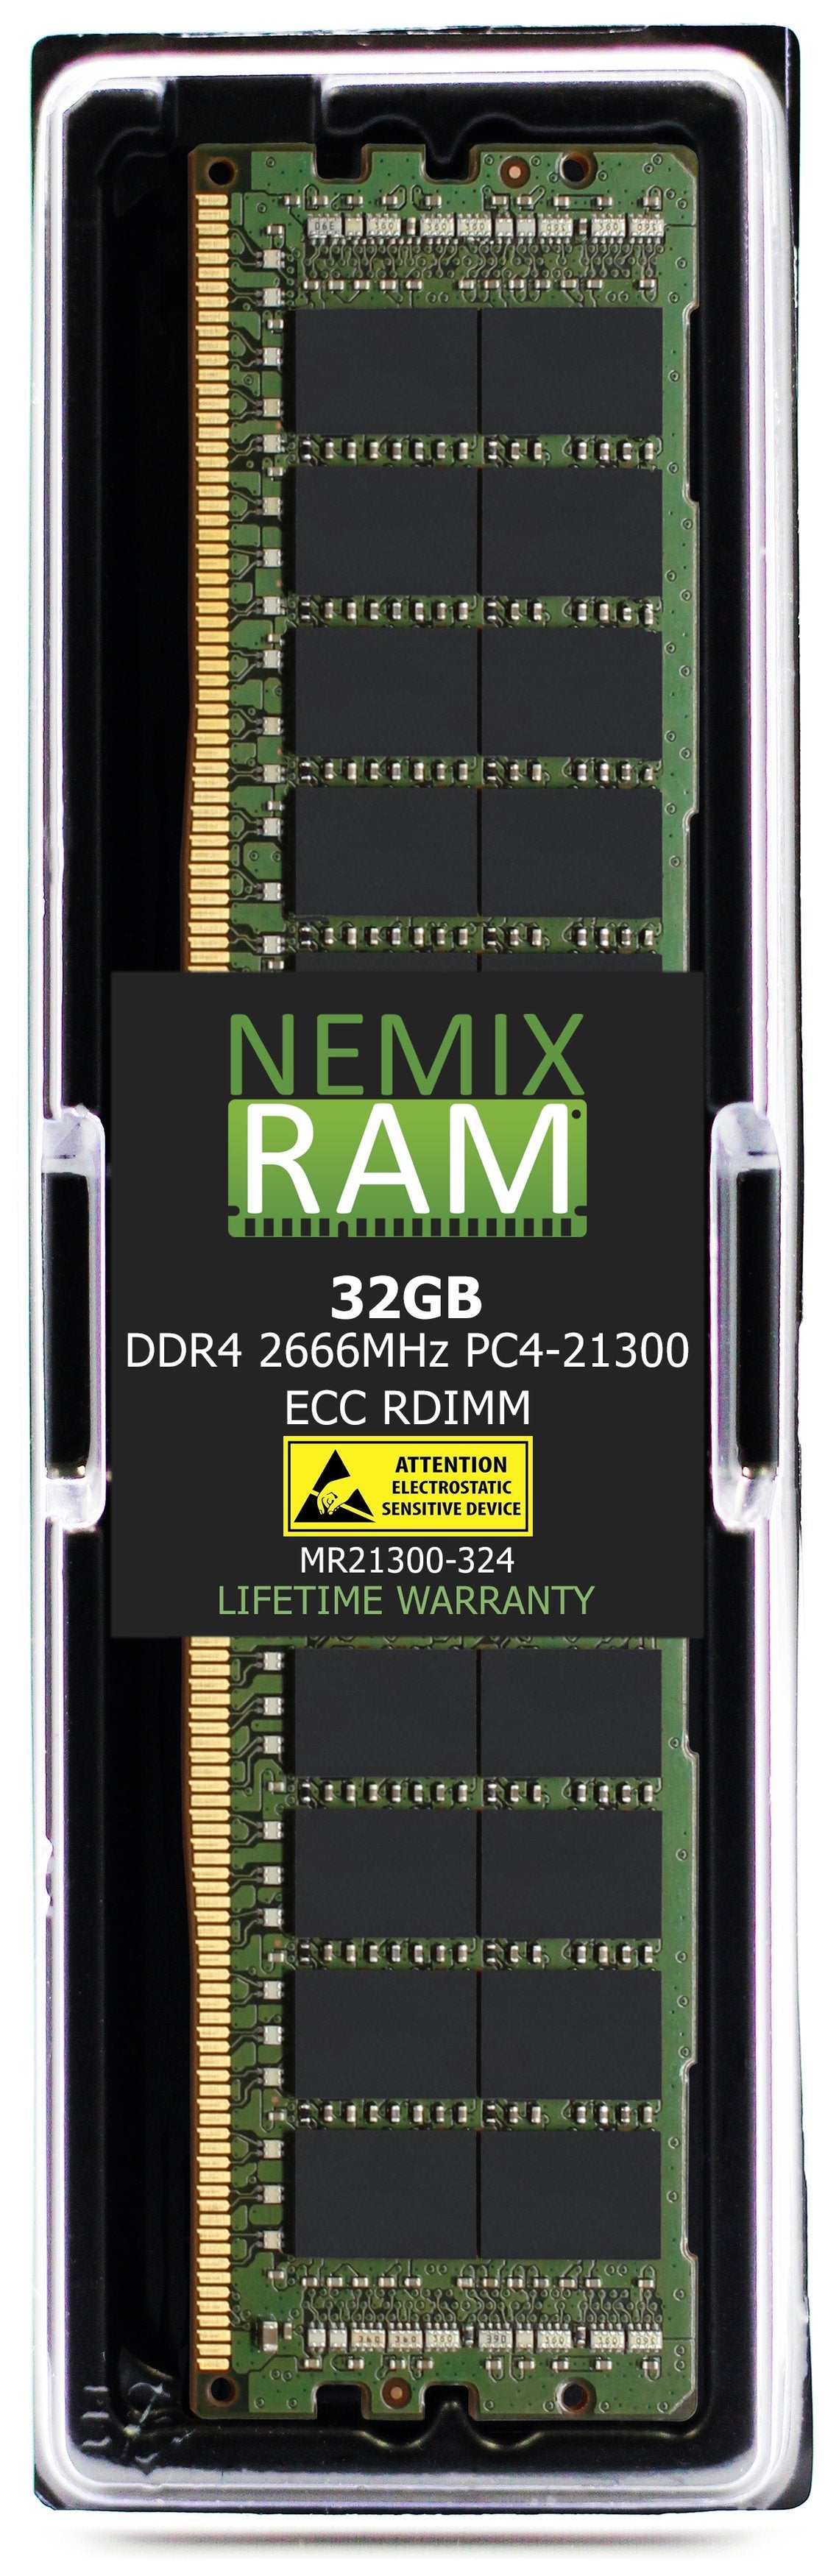 DDR4 2666MHZ PC4-21300 RDIMM Compatible with Synology D4RD-2666-32G